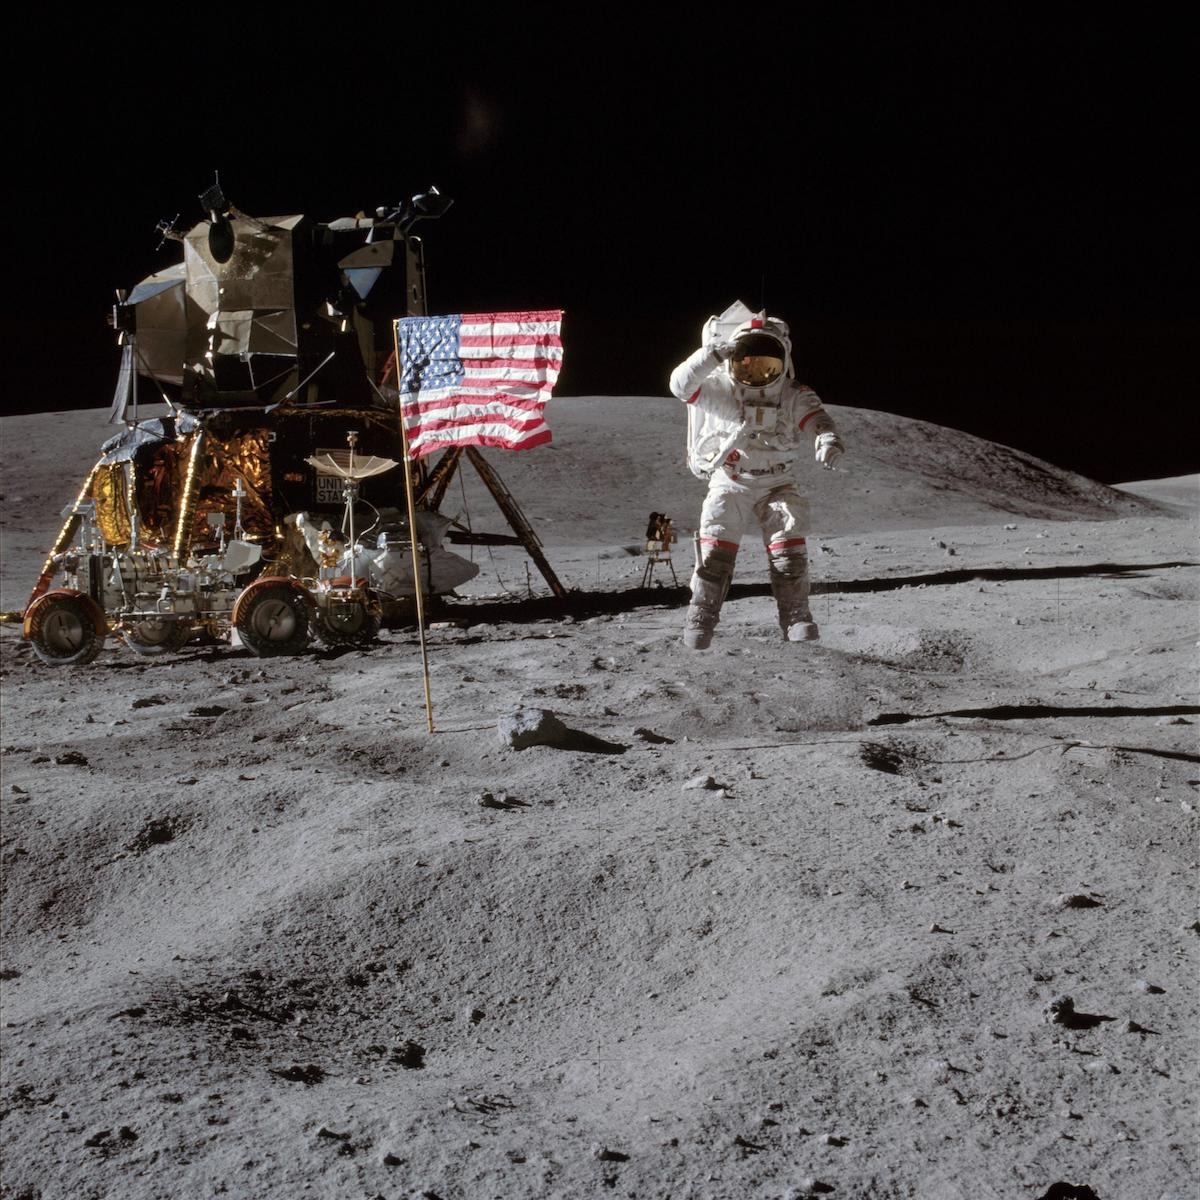 astronaut jumps and salutes near flag and lunar moduel